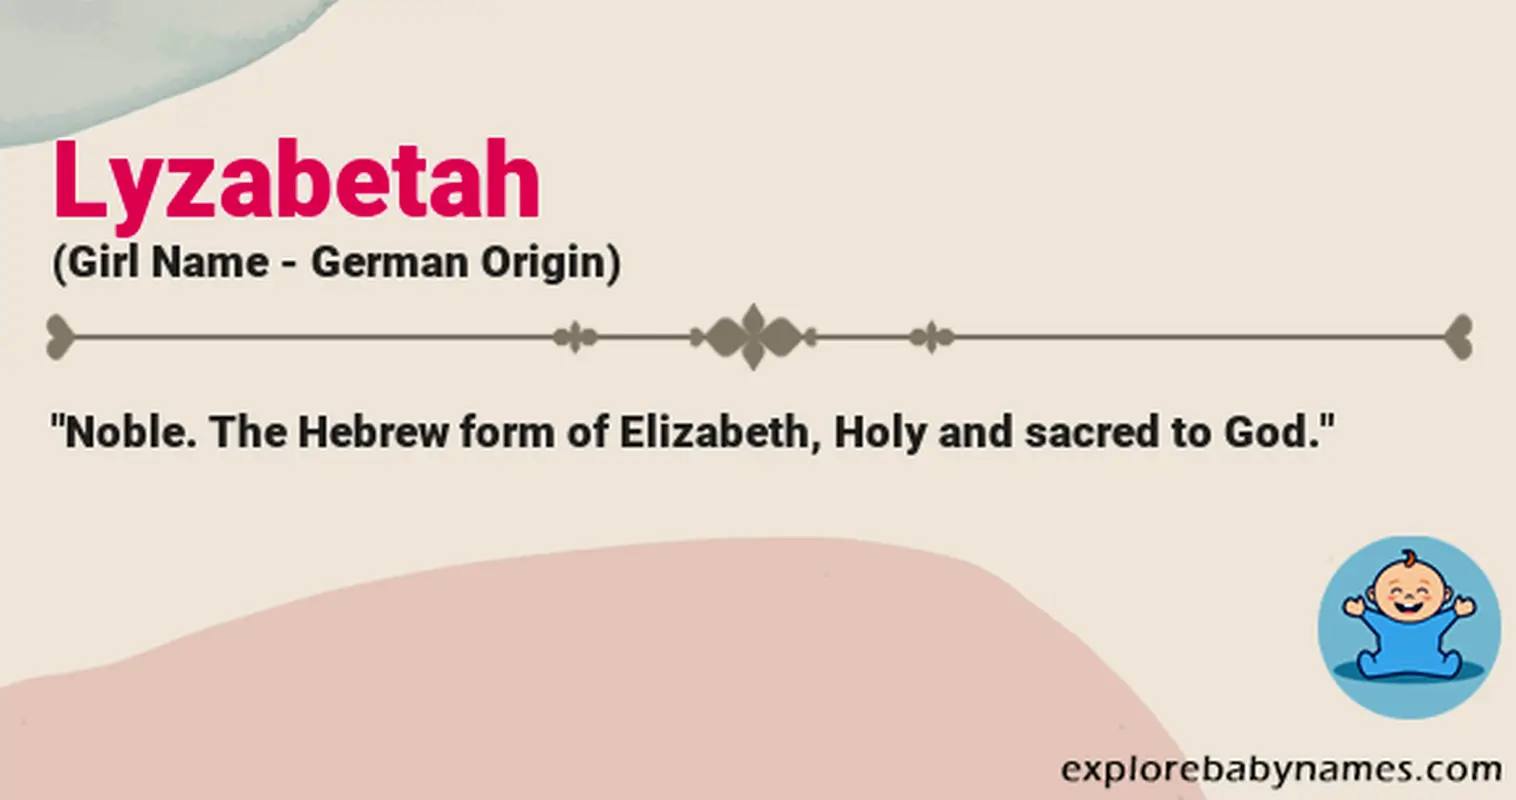 Meaning of Lyzabetah